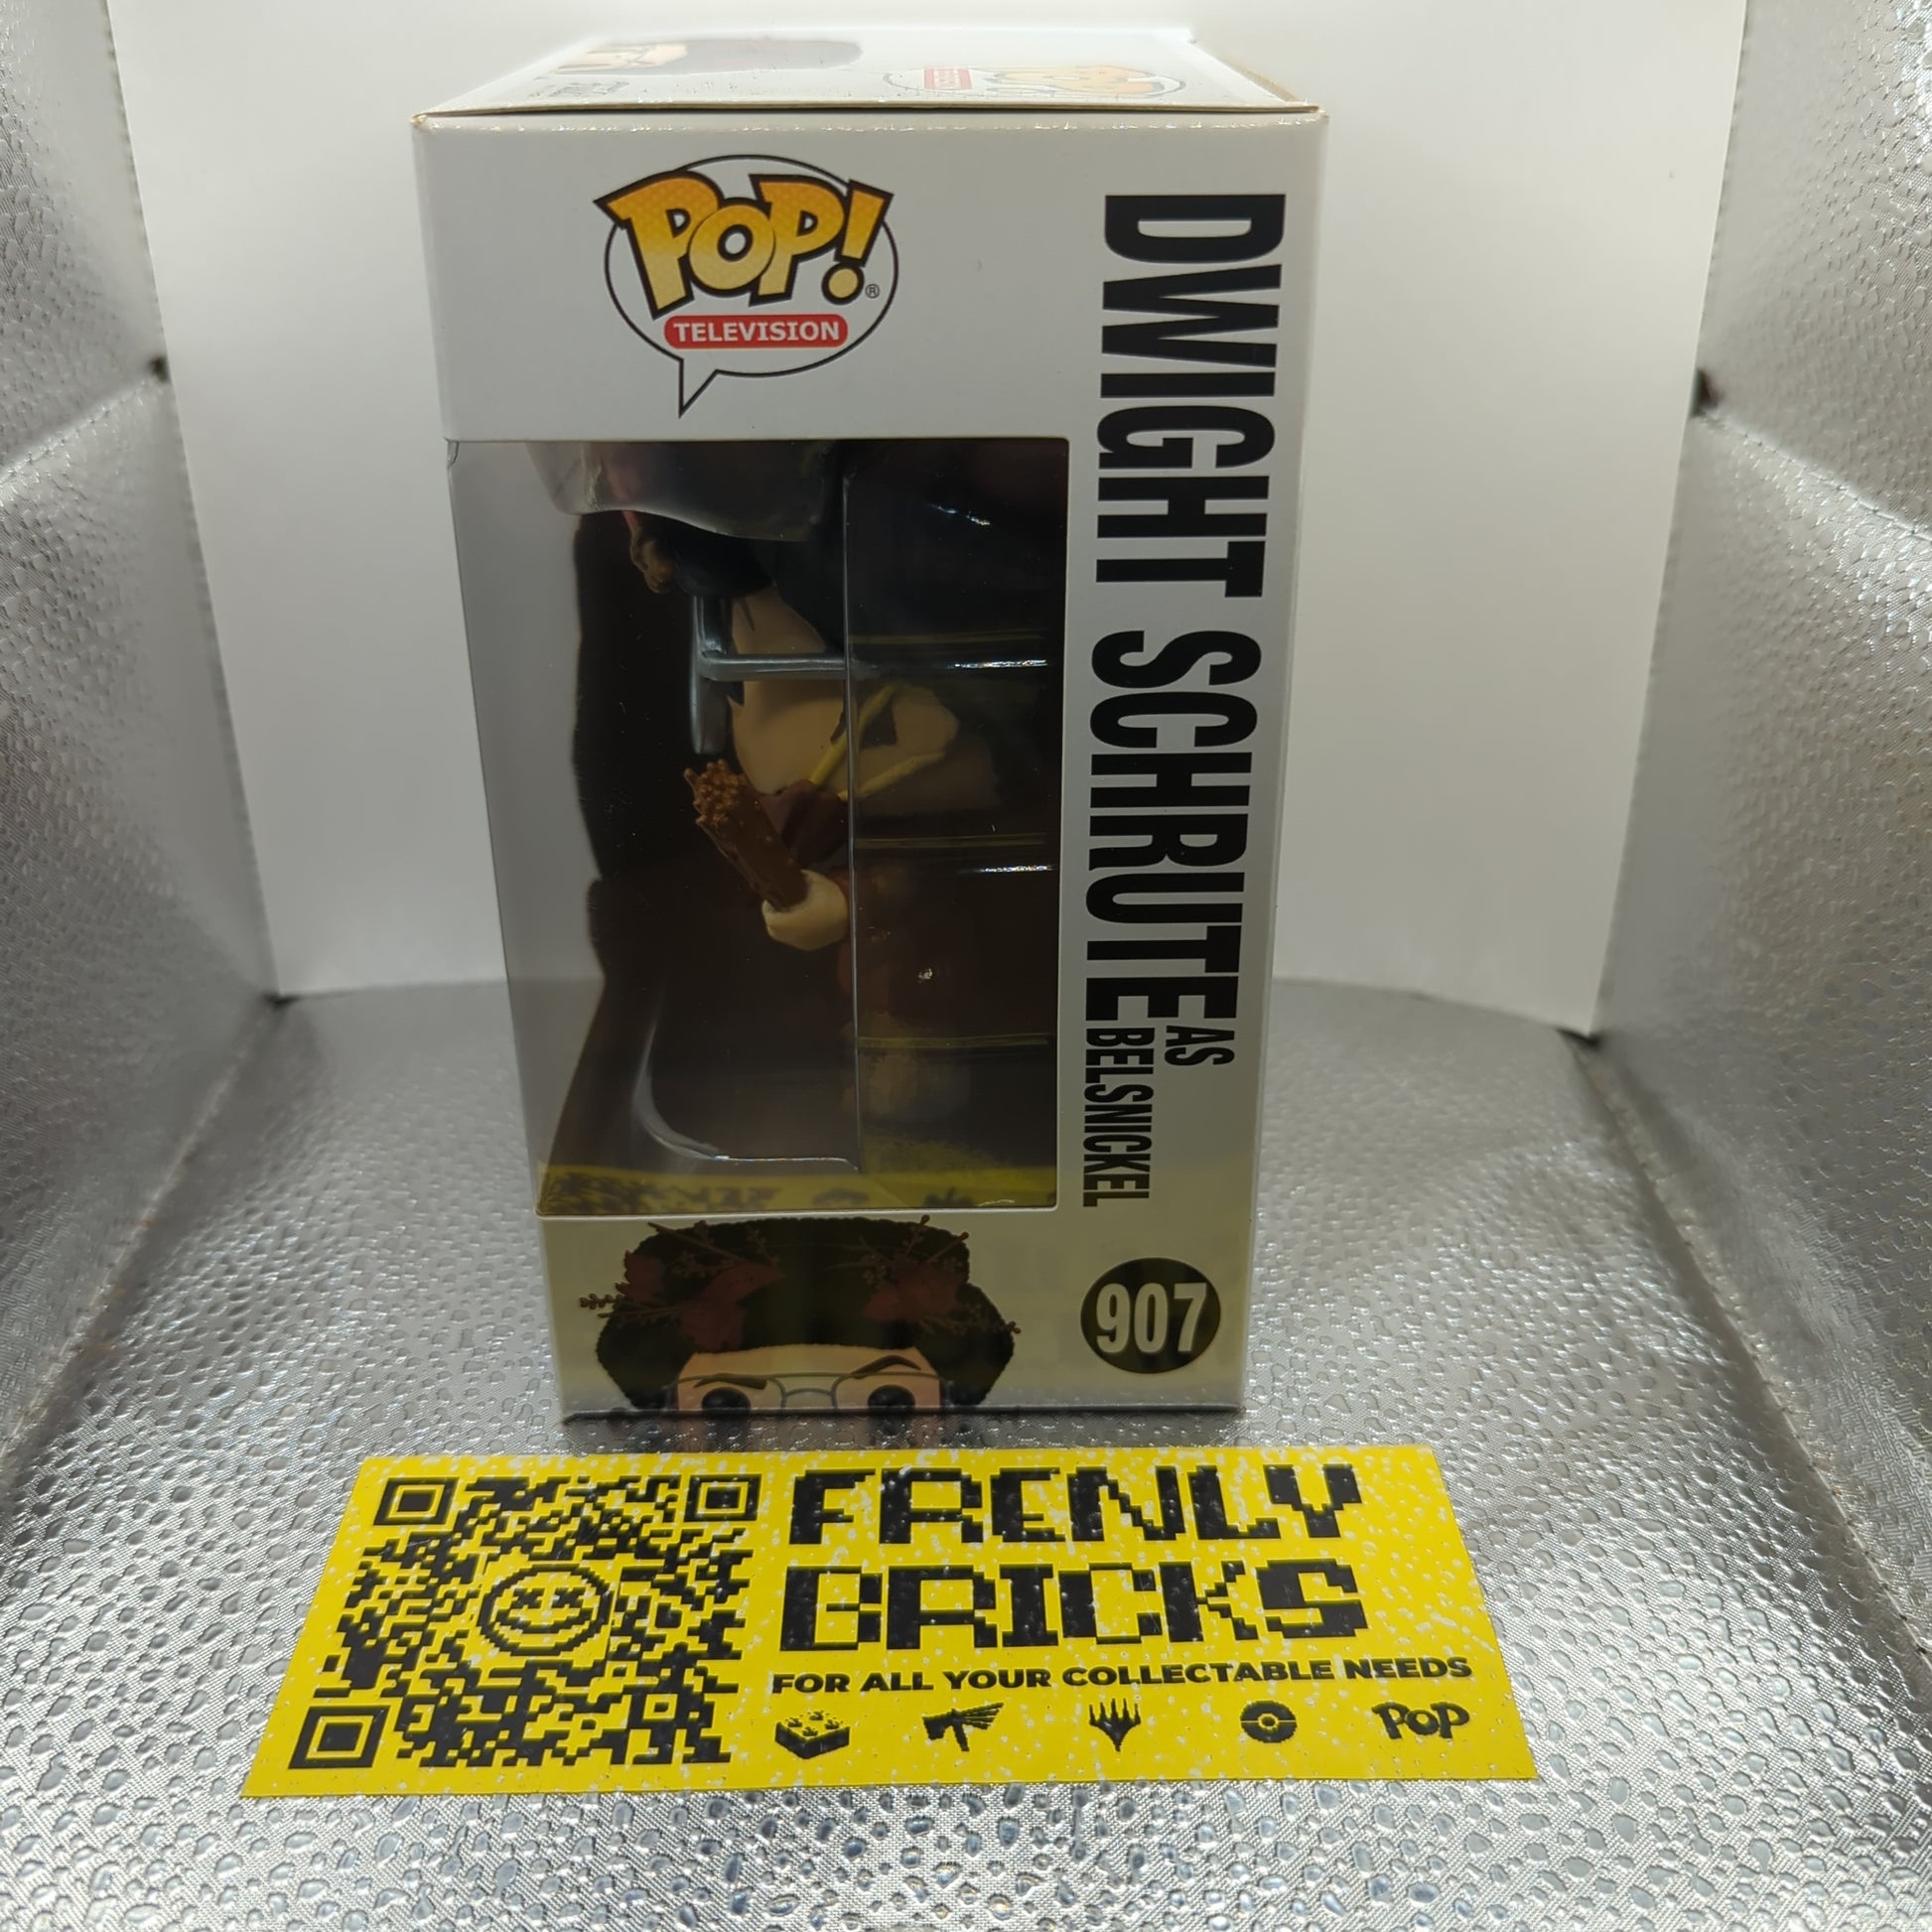 Funko Pop! Television: The Office US - Dwight Schrute as Belsnickle #907 FRENLY BRICKS - Open 7 Days